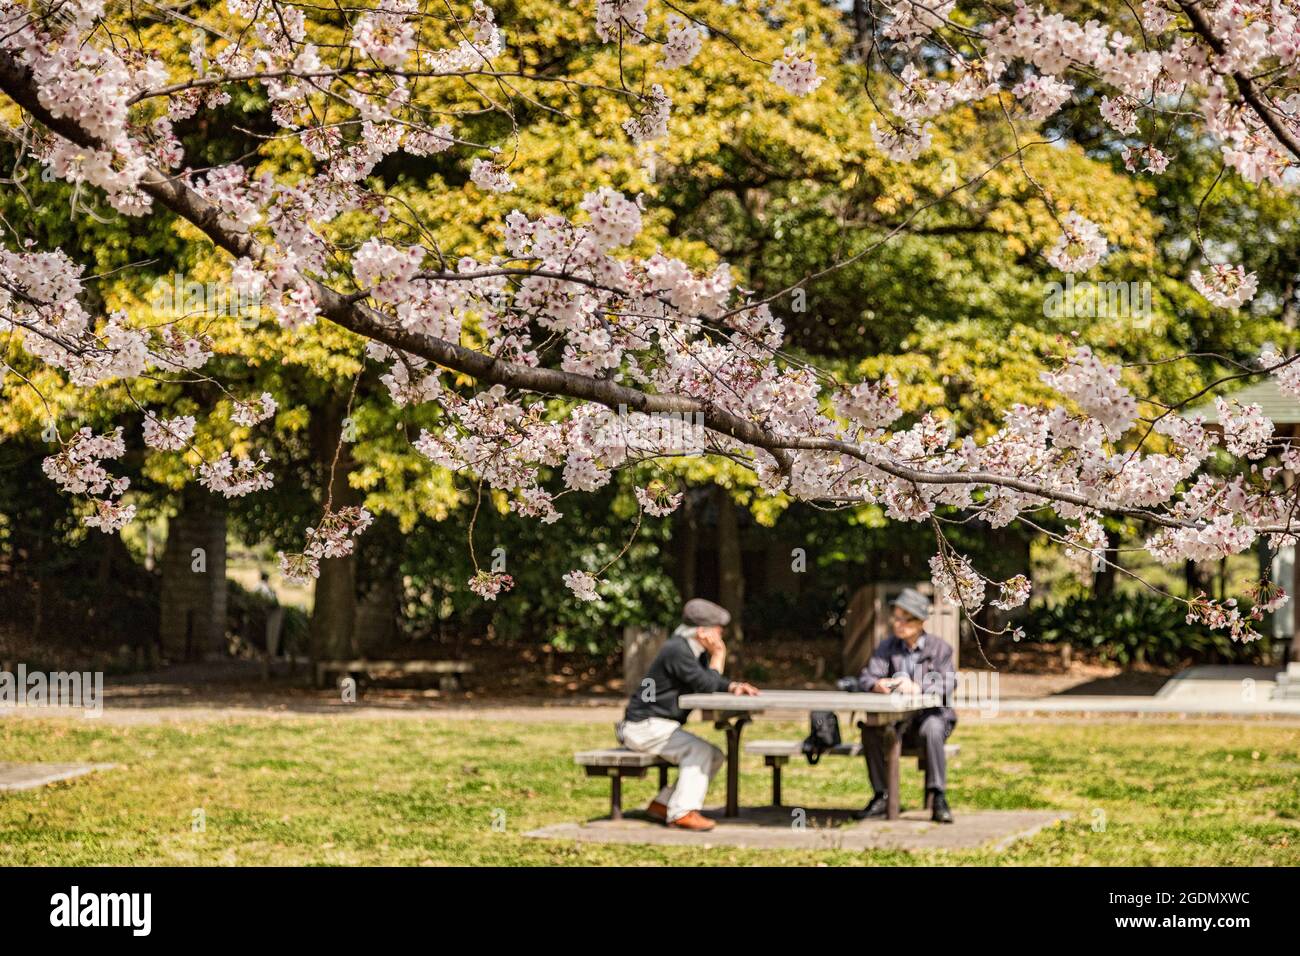 5 April 2019: Tokyo, Japan - Cherry blossom in Kiyosumi Garden, a traditional style landscape garden in Tokyo. Focus on foreground. Stock Photo